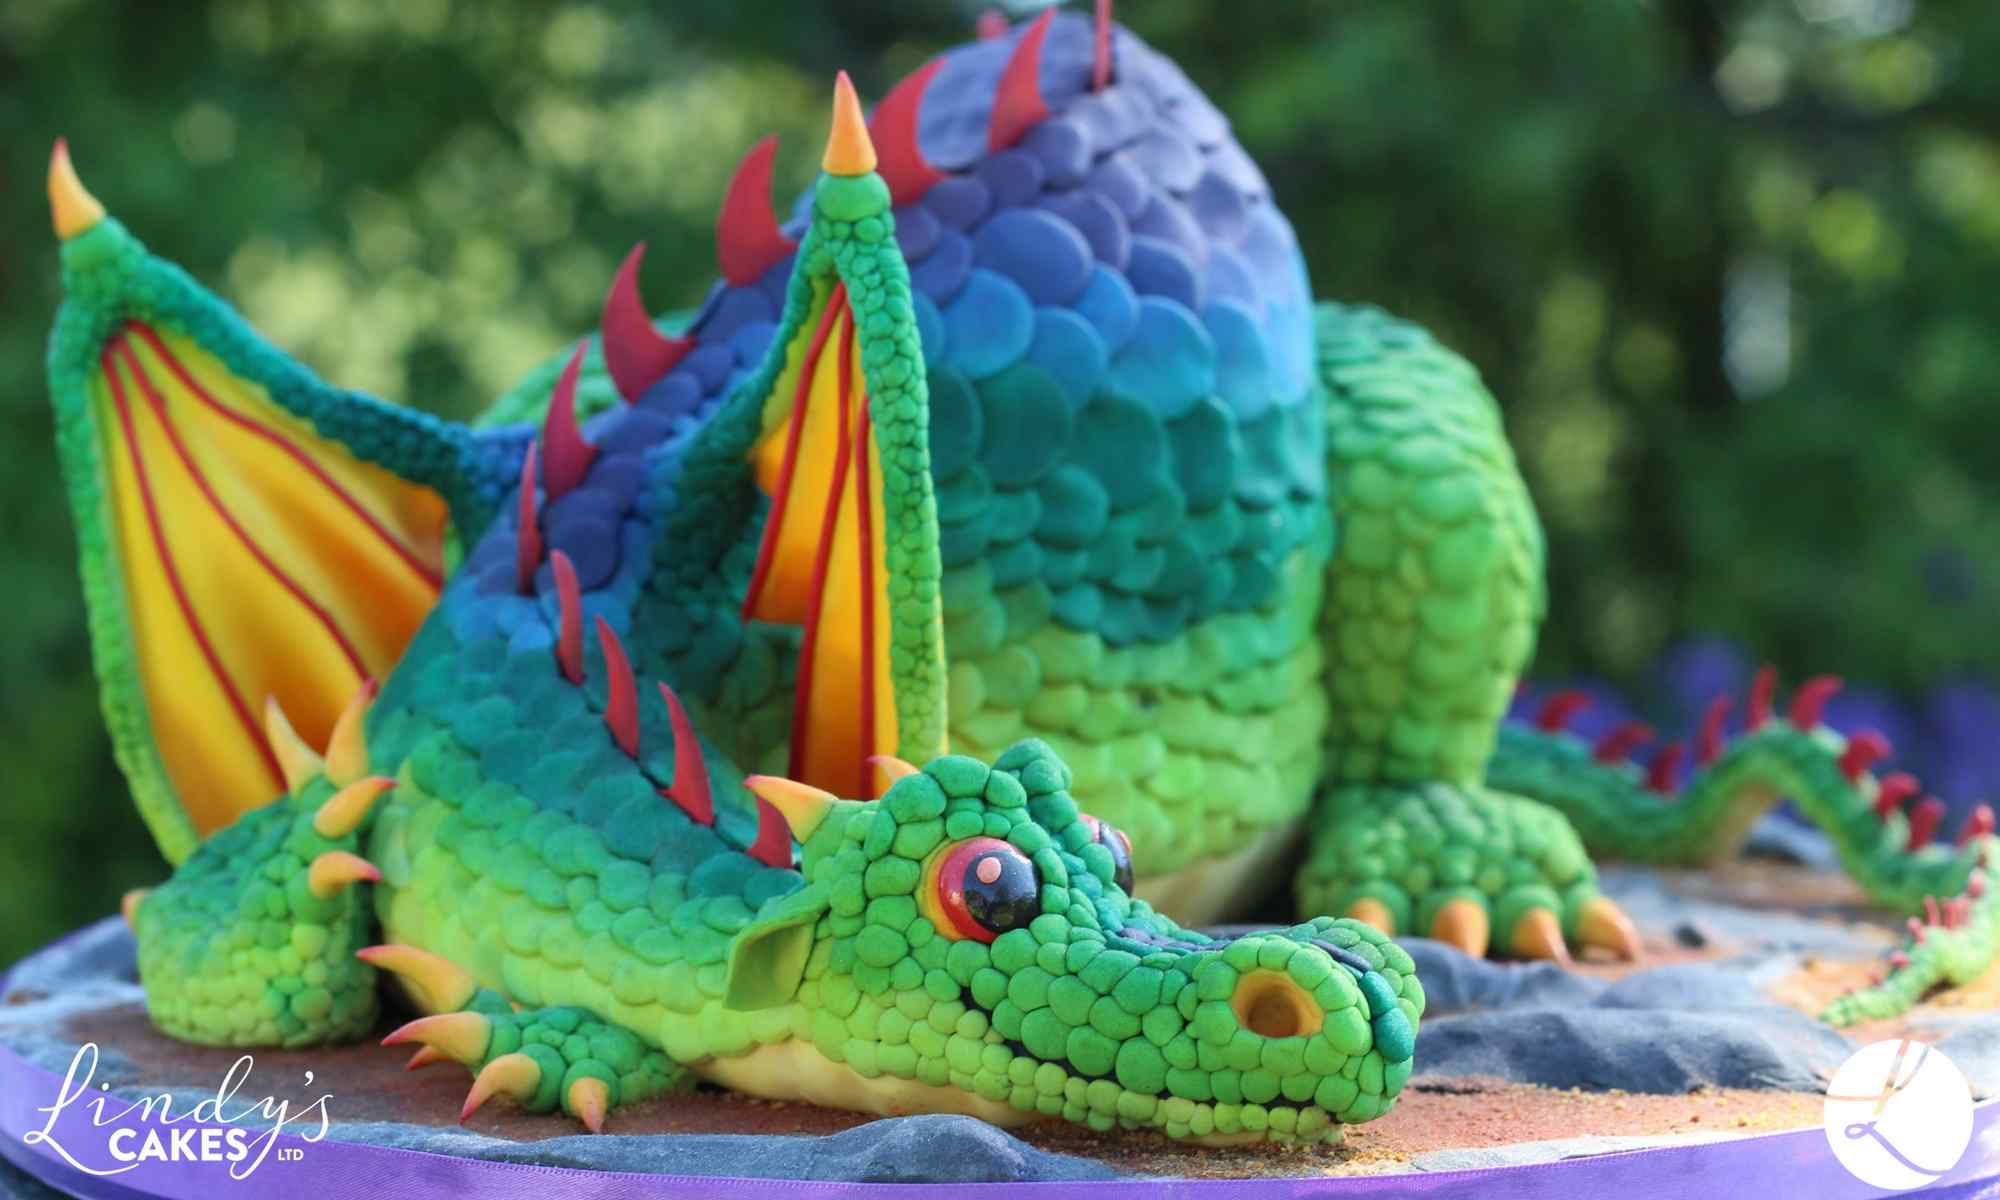 award winning dragon cake by best-selling author Lindy Smith